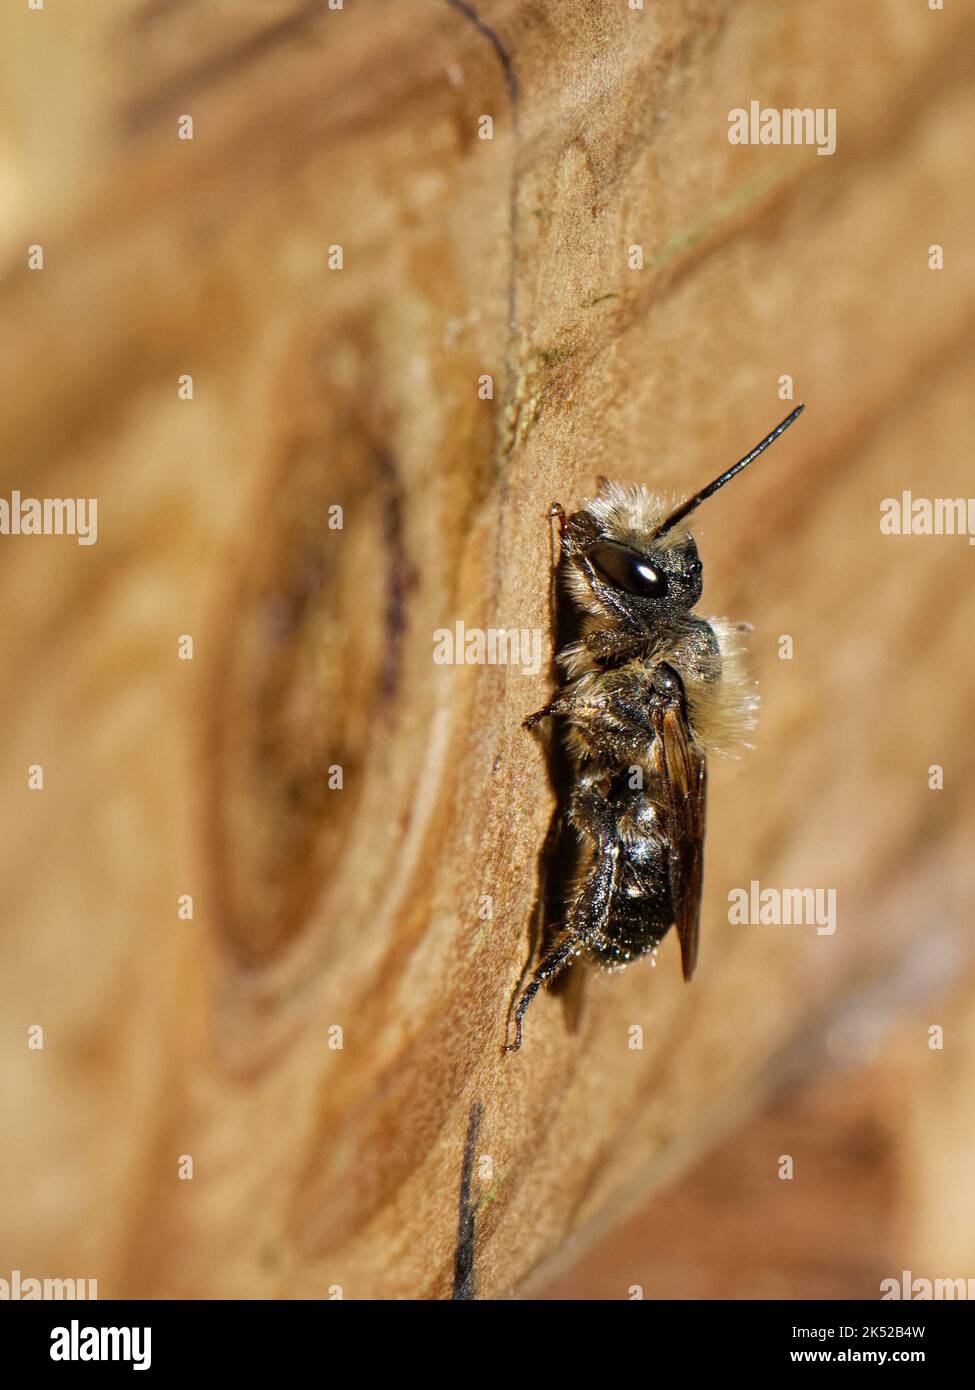 Orange-vented mason bee (Osmia leaiana) male visiting an insect hotel in search of females, Wiltshire garden, UK, July. Stock Photo